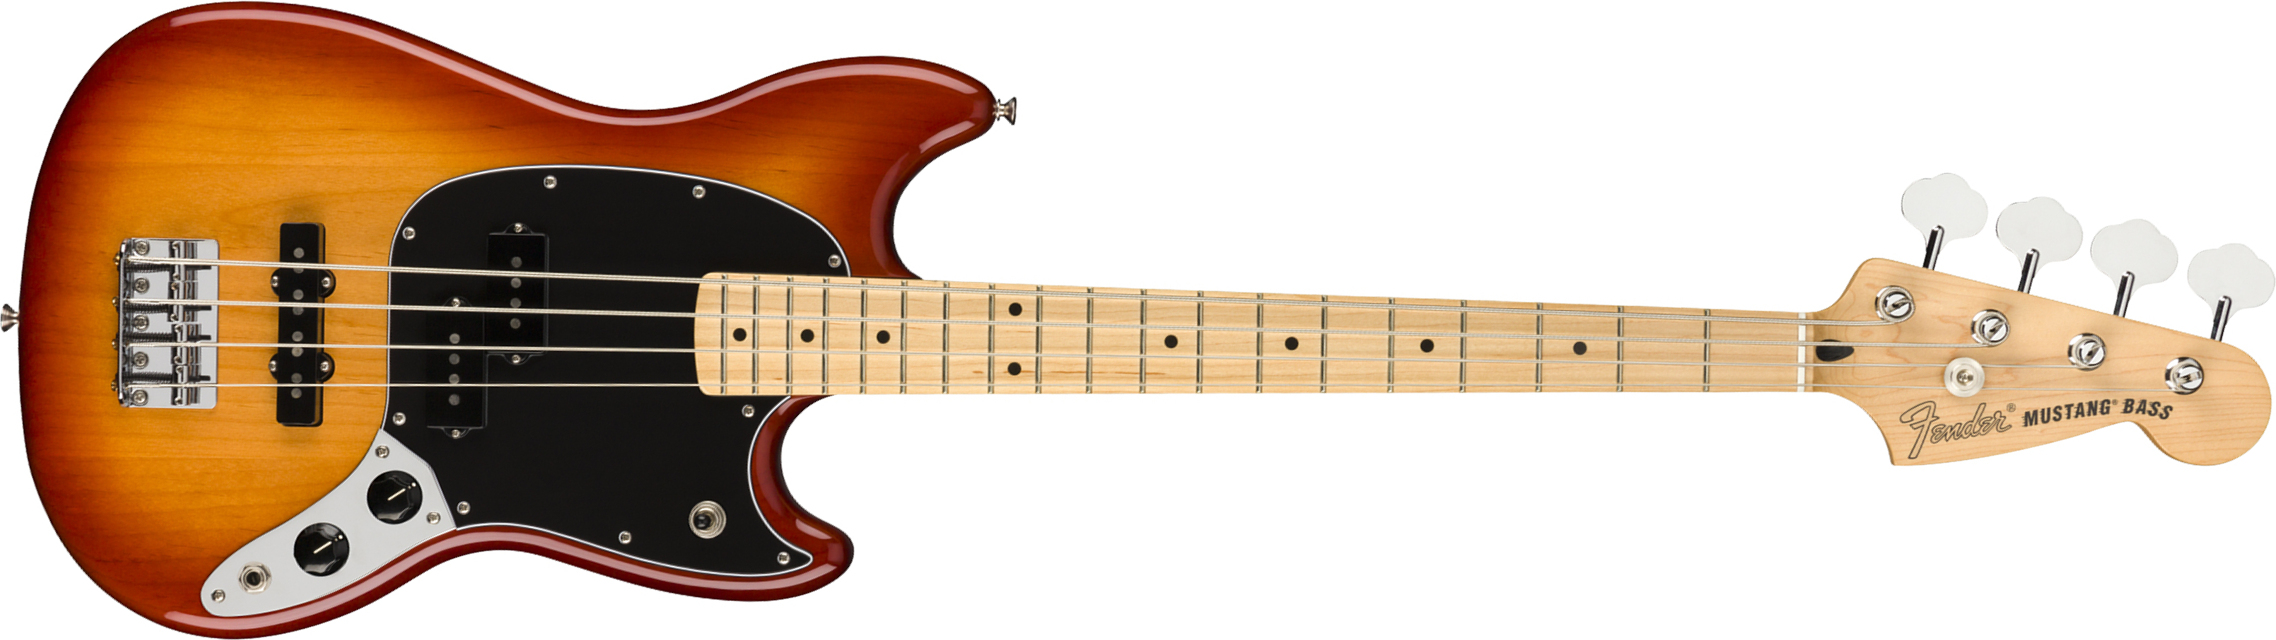 Fender Player Mustang Bass Mex Pj Mn - Sienna Sunburst - Electric bass for kids - Main picture